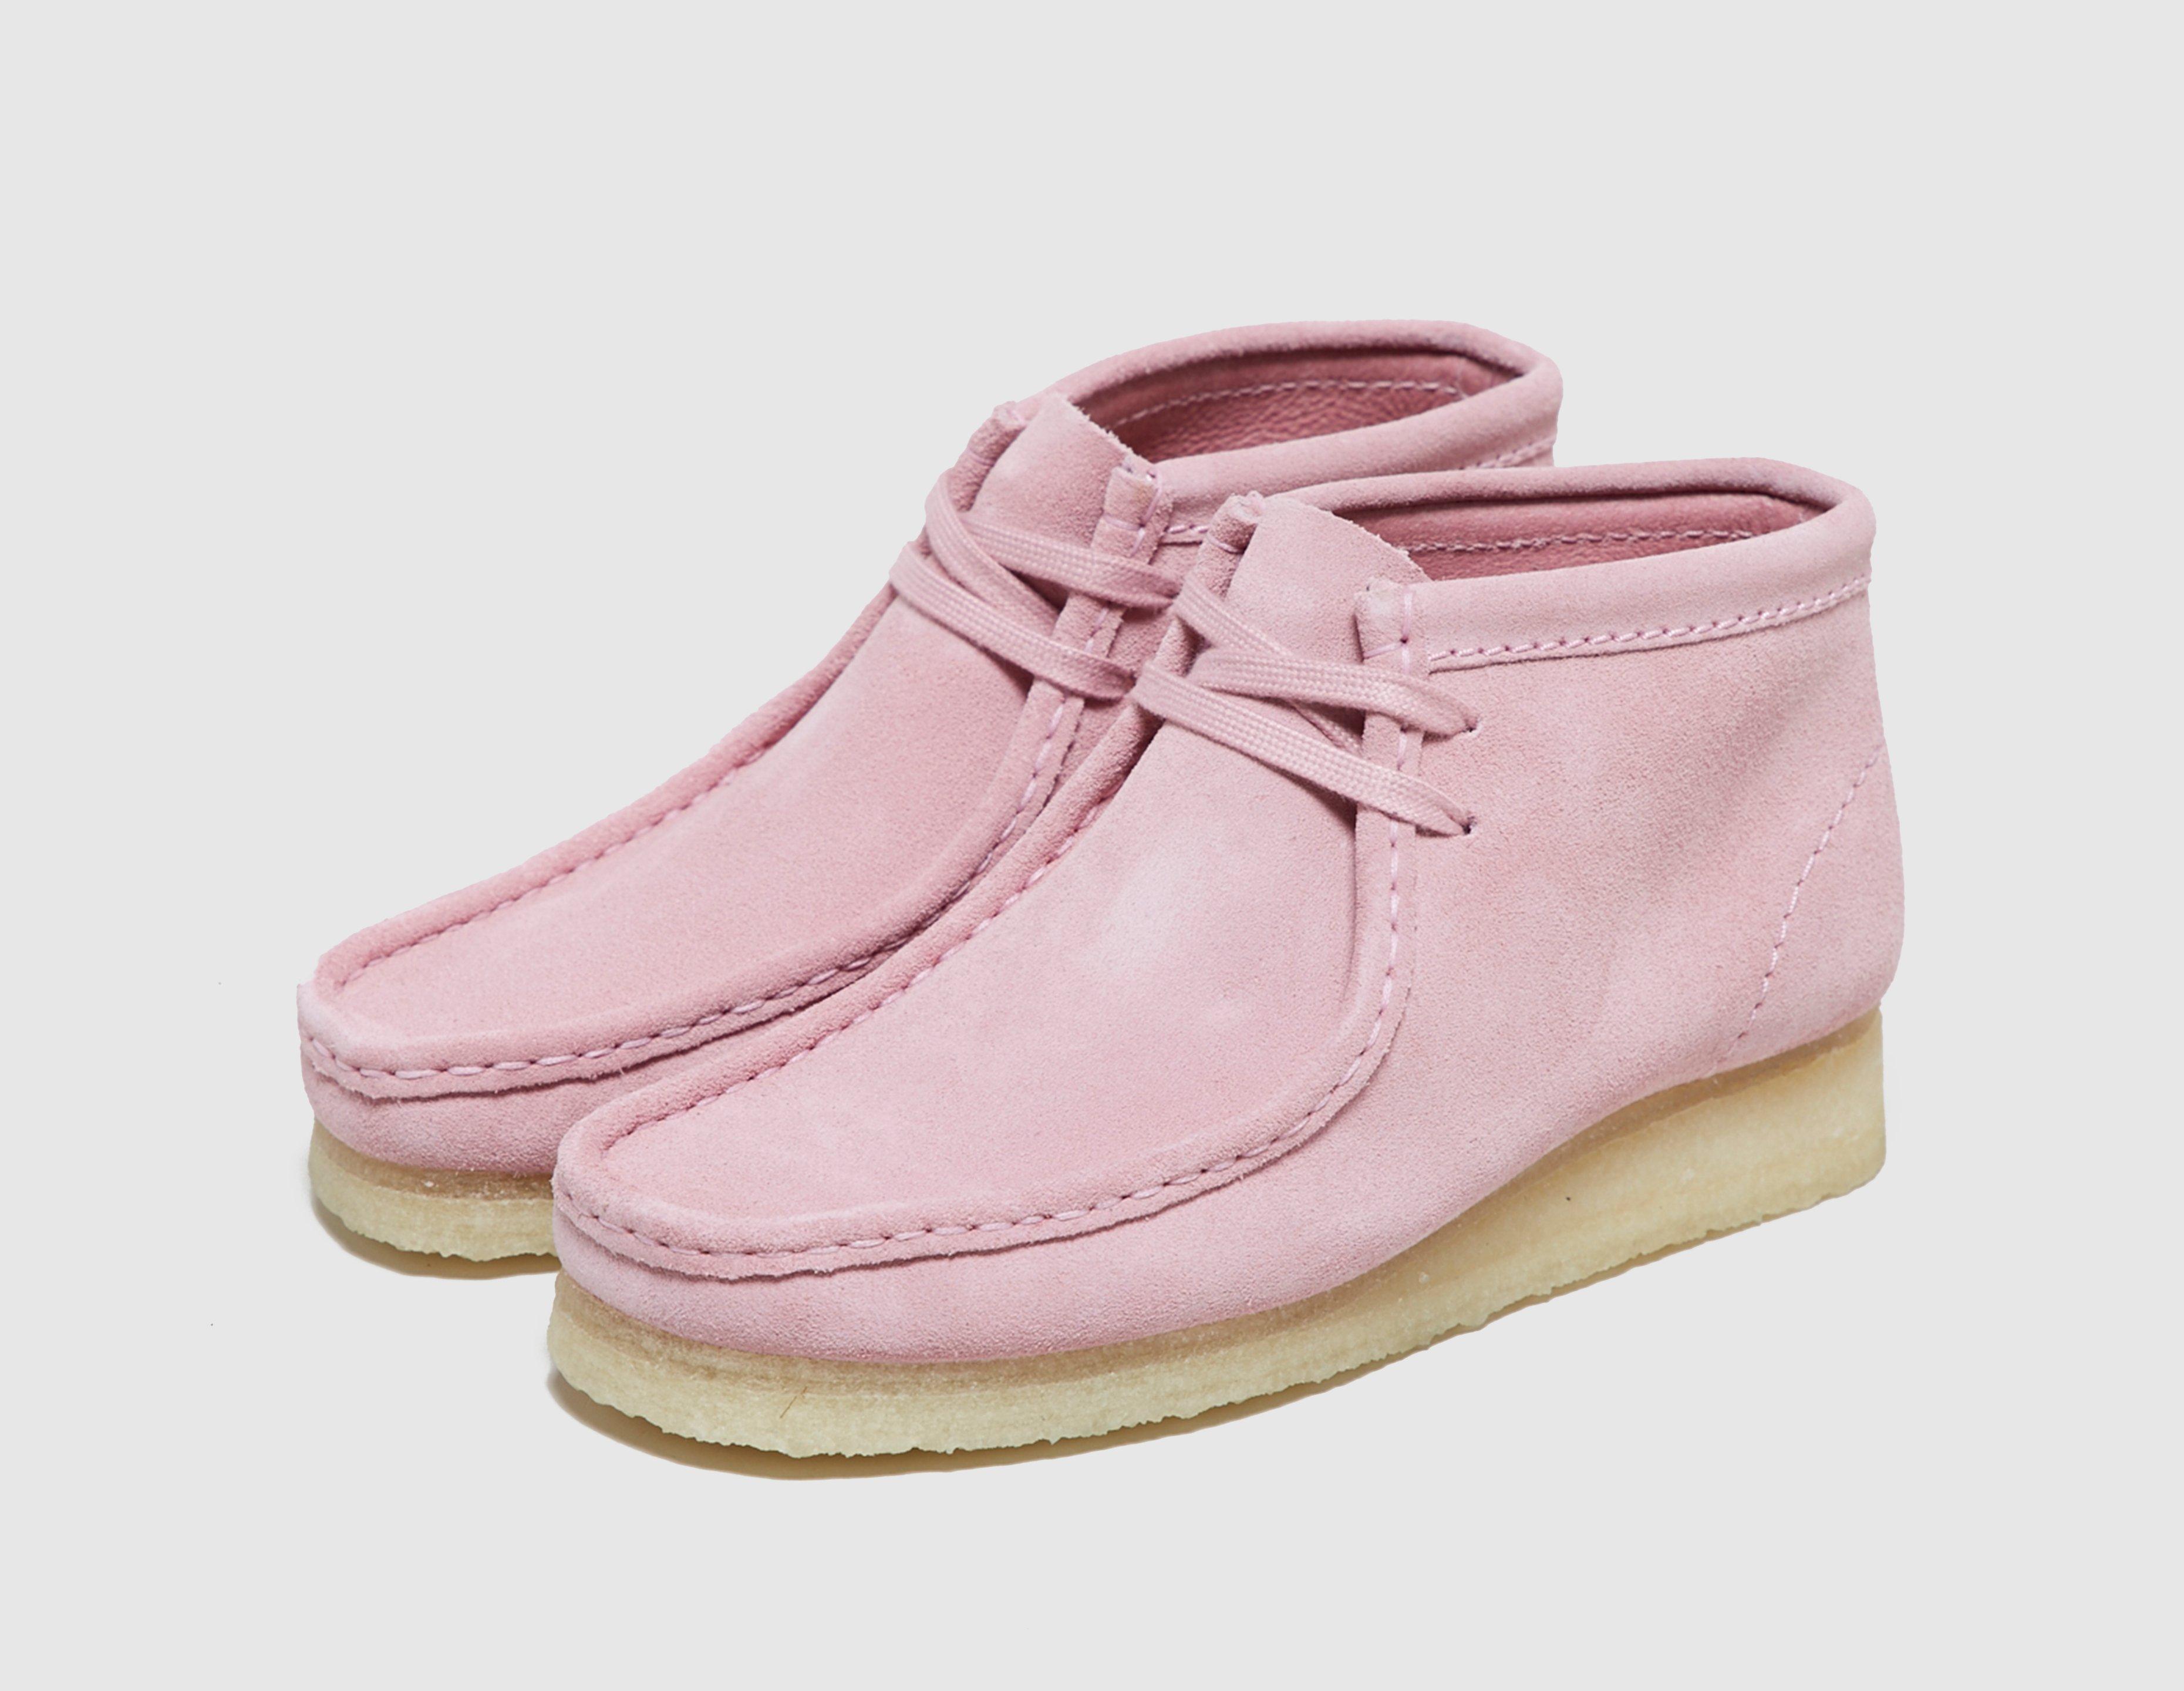 clarks womens wallabee boots